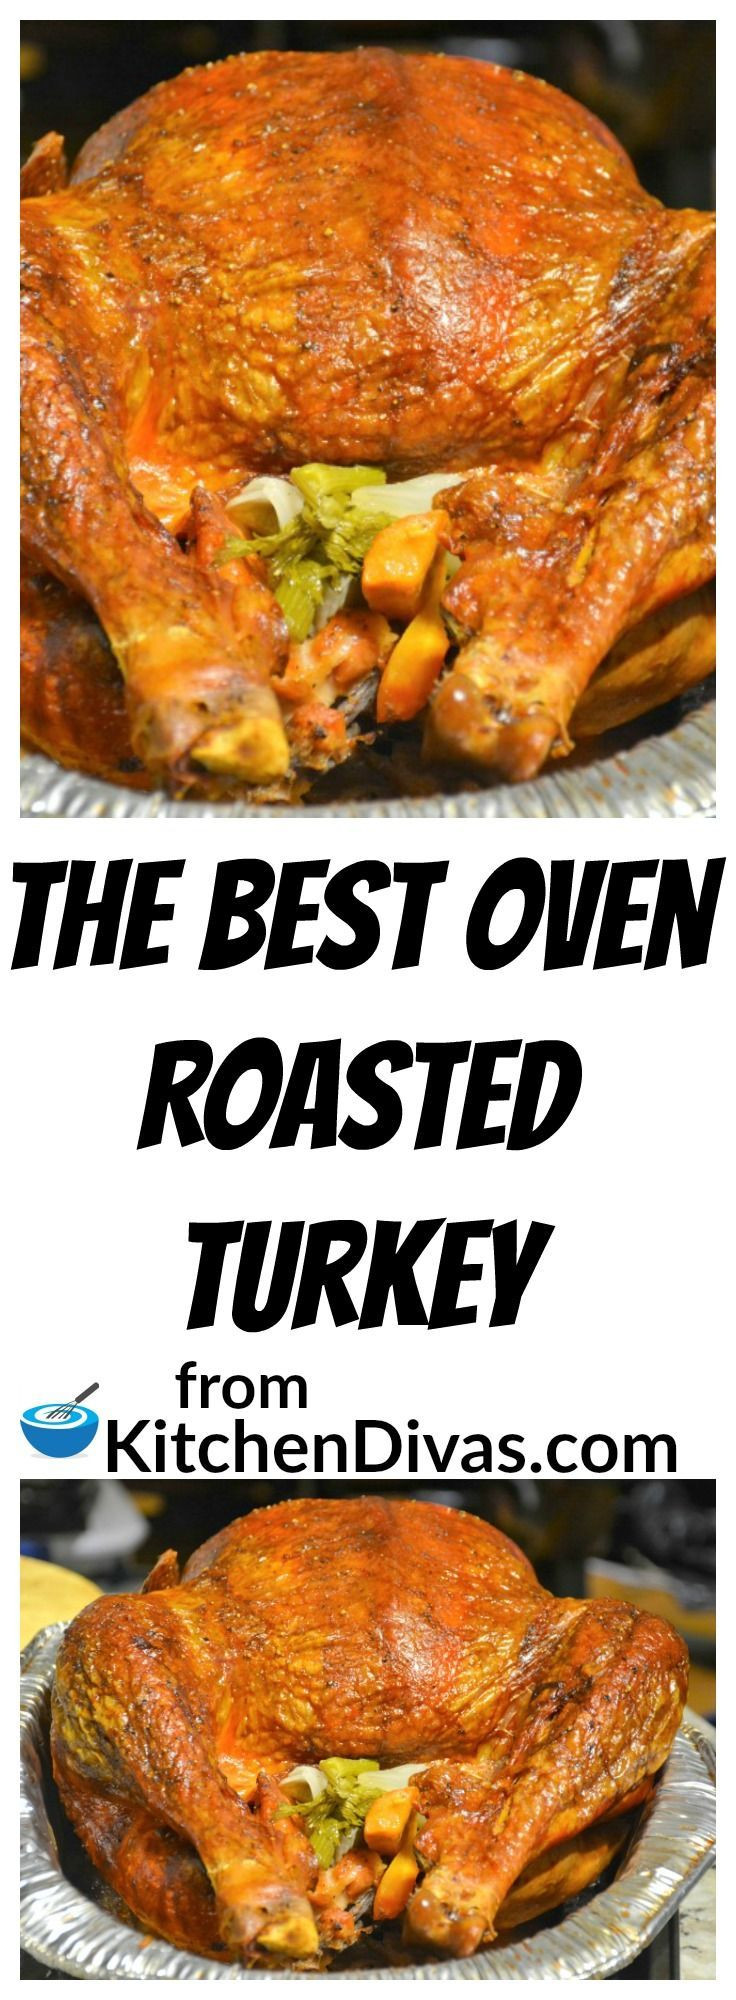 Oven Turkey Recipes Thanksgiving
 The Best Oven Roasted Turkey Recipe